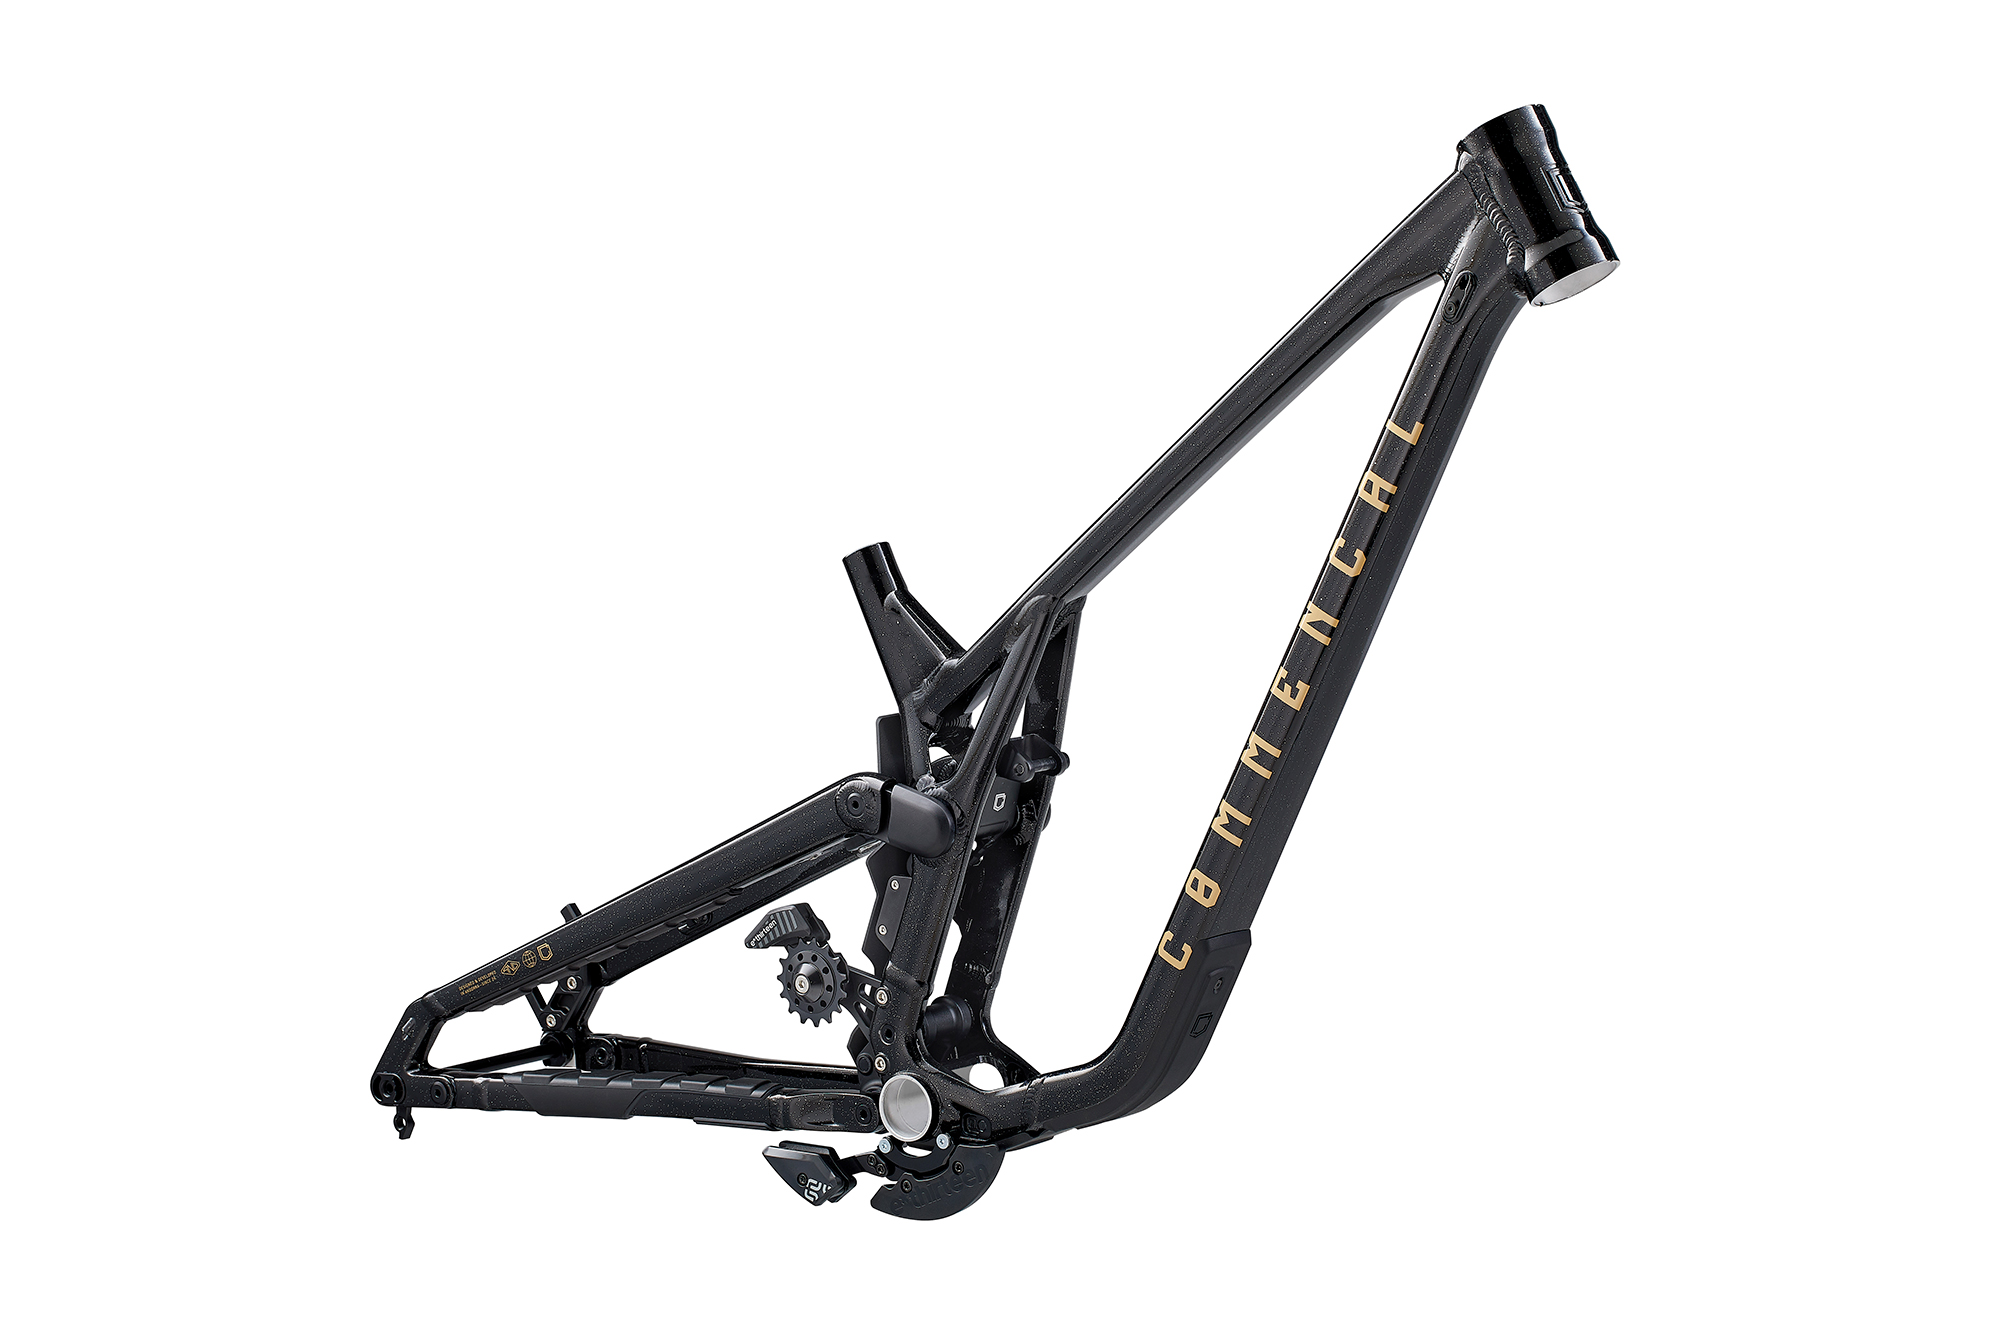 CUADRO COMMENCAL SUPREME DH V5 GLITTERY BLACK image number null